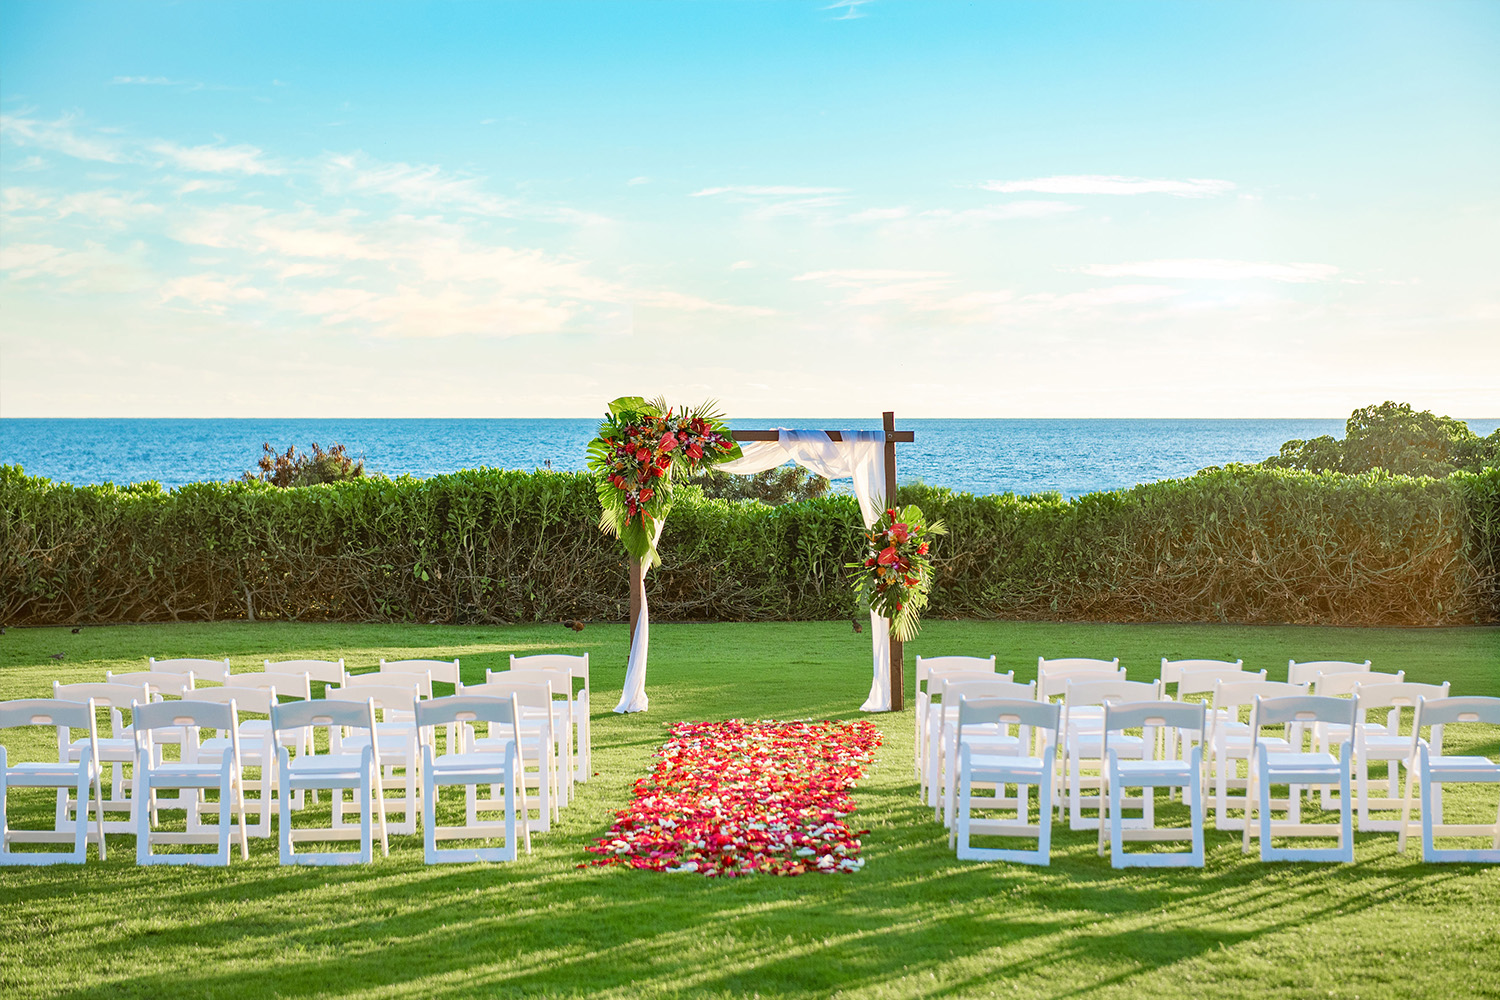 Beach ceremony location prepared by our wedding planner. A beautiful view of the beach is one of the features of destination weddings.